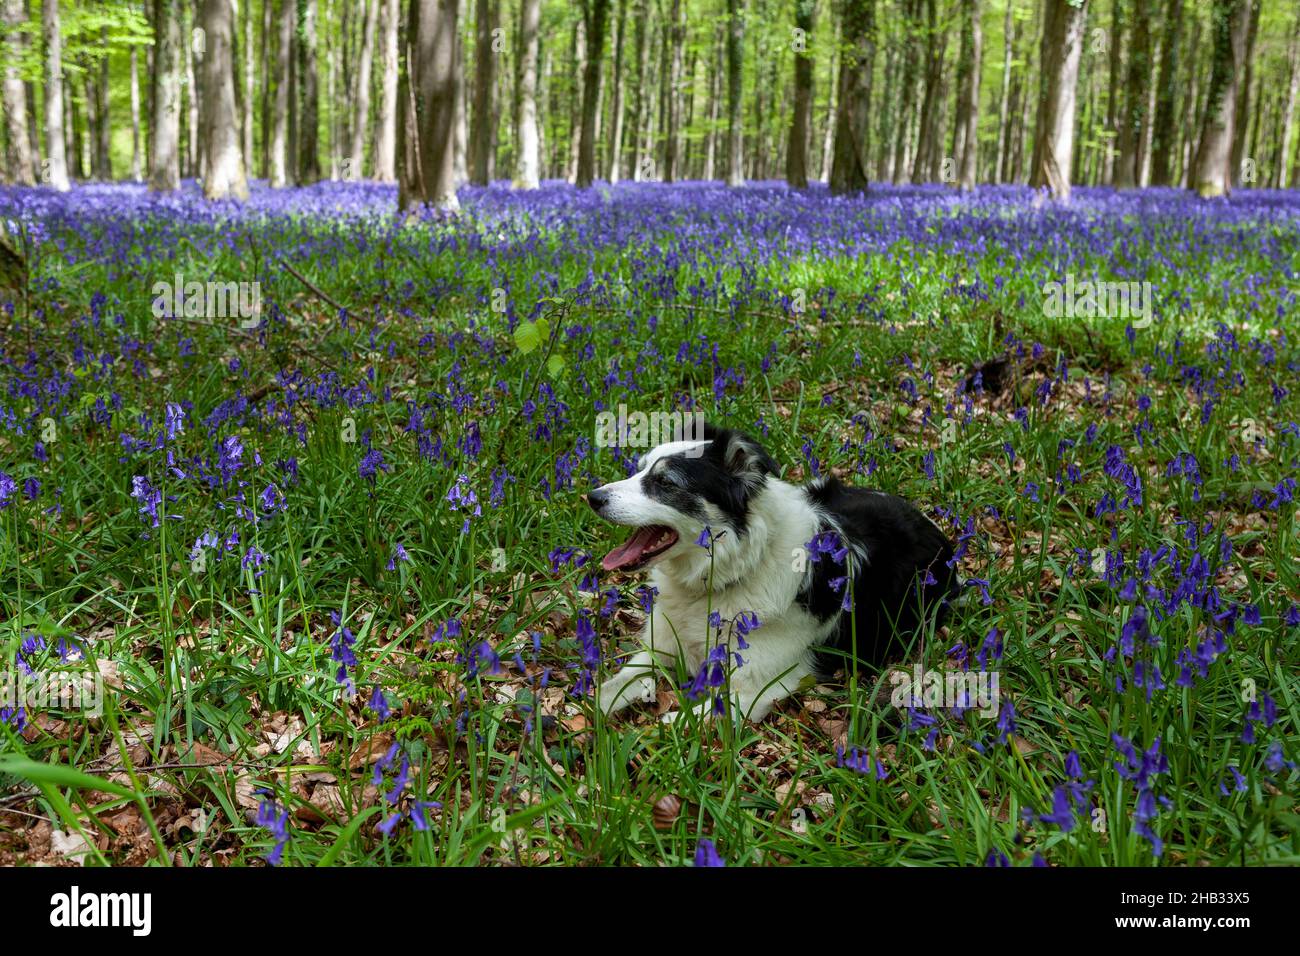 A Border Collie dog on a carpet of bluebells (Hyacinthoides non-scripta), Inholmes Wood, Stoughton, West Sussex, UK Stock Photo